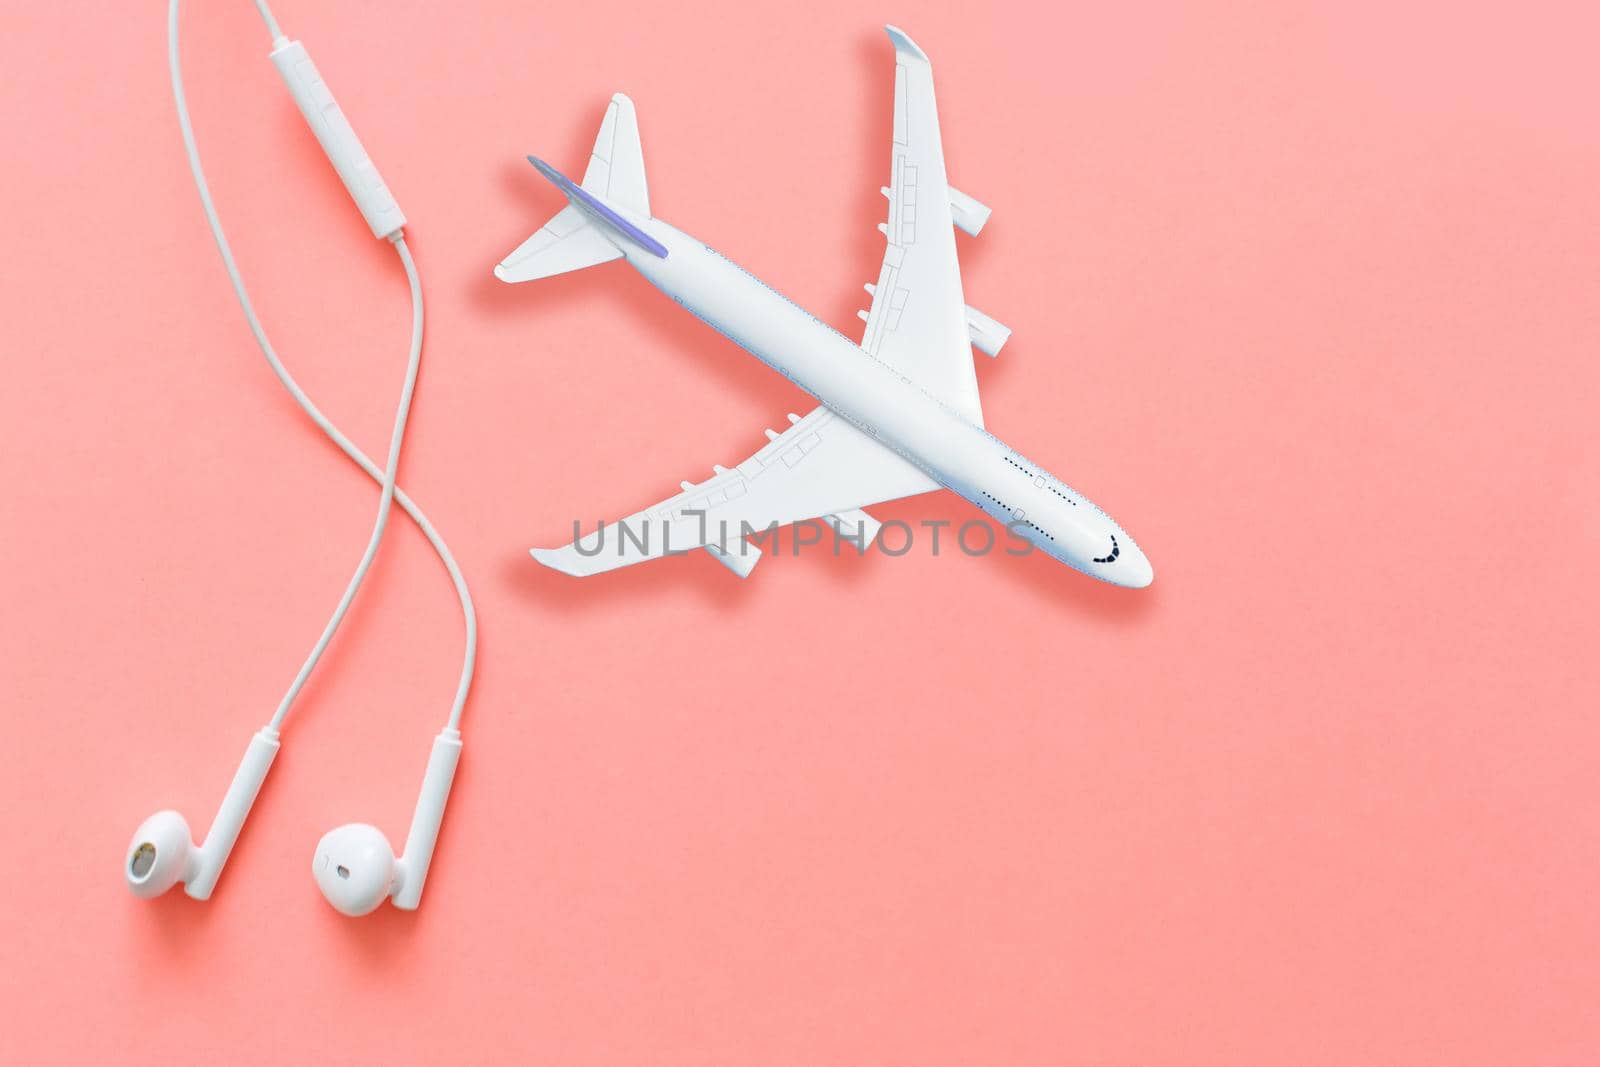 Model plane, airplane on pastel color background. Flat lay design